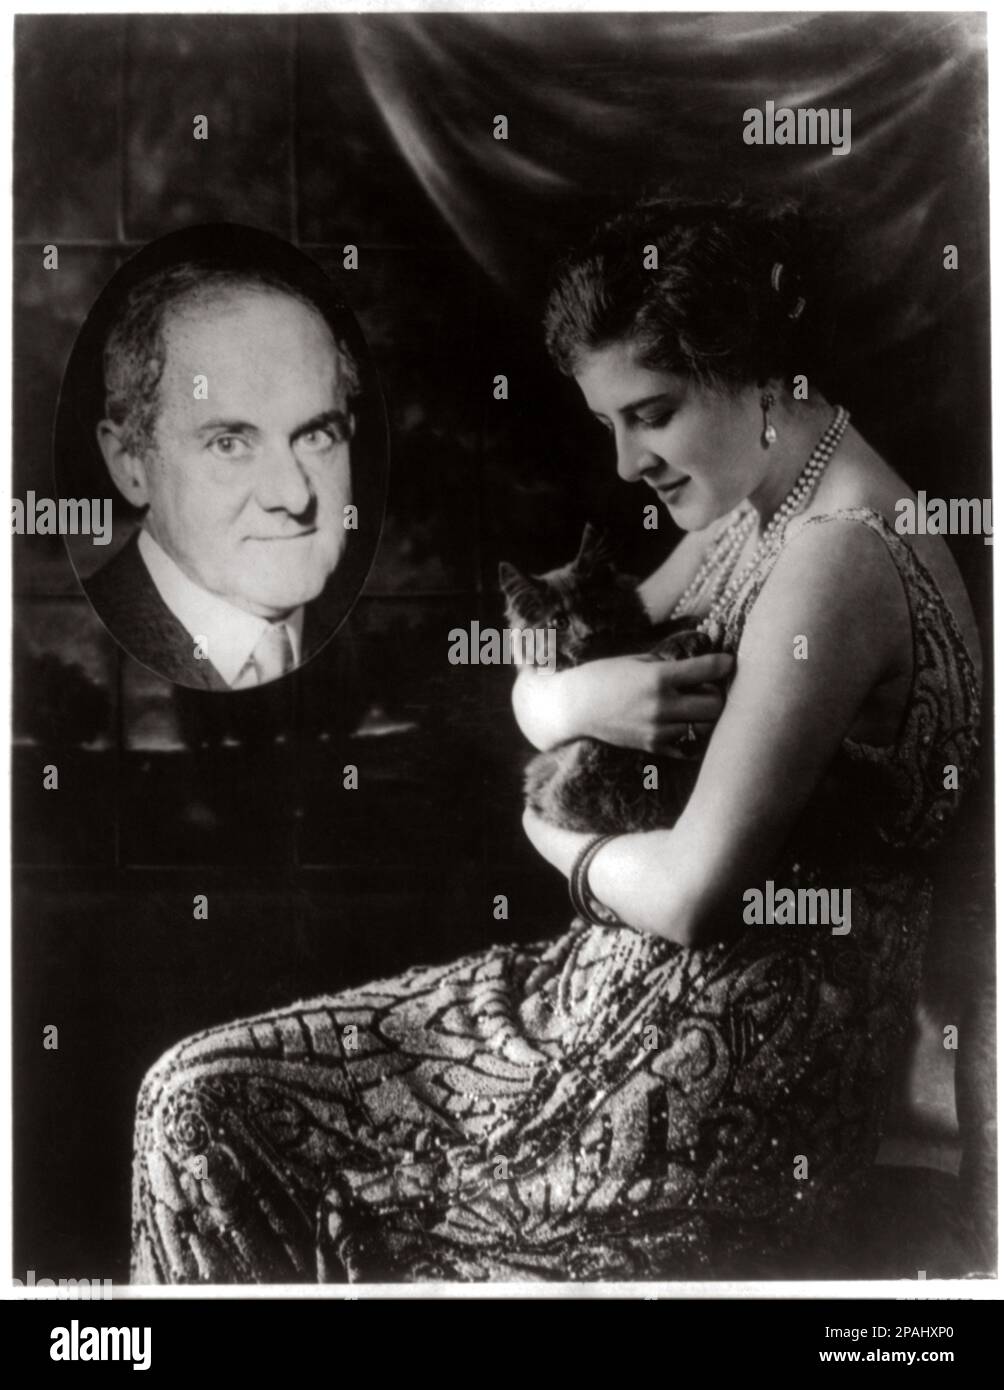 1920's , USA  : The Opera soprano singer GANNA  WALSKA ( born Hanna Puacz ,  Brest-Litovsk , Russia 1887 - Santa Barbara 1984) to wed the millionaire manufacturer and newspaper heir Harold F. McCormick (1872-1941) , divorced in 1931 . Walska pursued a career as an opera singer. Her memoirs were called Always Room at the Top. Orson Welles claimed that McCormick's lavish promotion of Walska's opera career—despite her apparent renown as a terrible singer—was a direct influence on the screenplay for Citizen Kane, wherein the titular character does much the same for his second wife, Susan Alexander Stock Photo